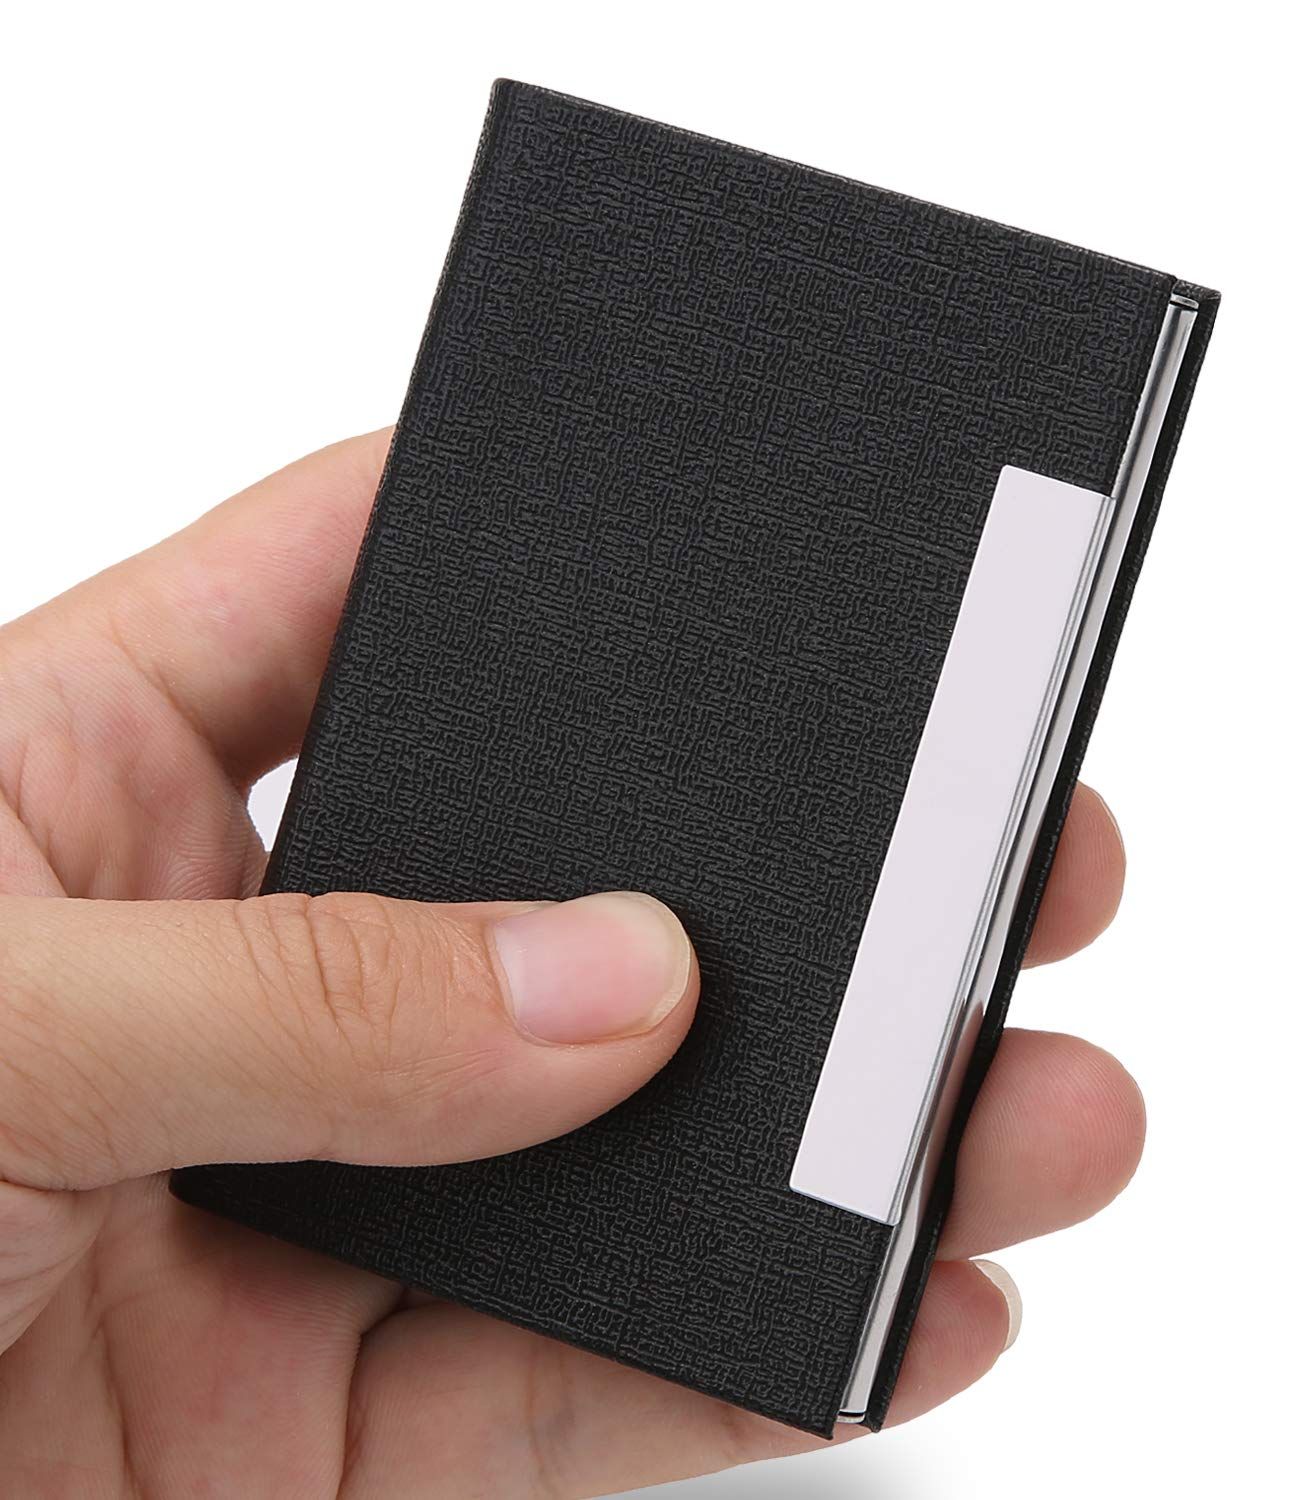 Pocket Black PU Leather&Stainless Steel Business Name Card Case Card Holder US 